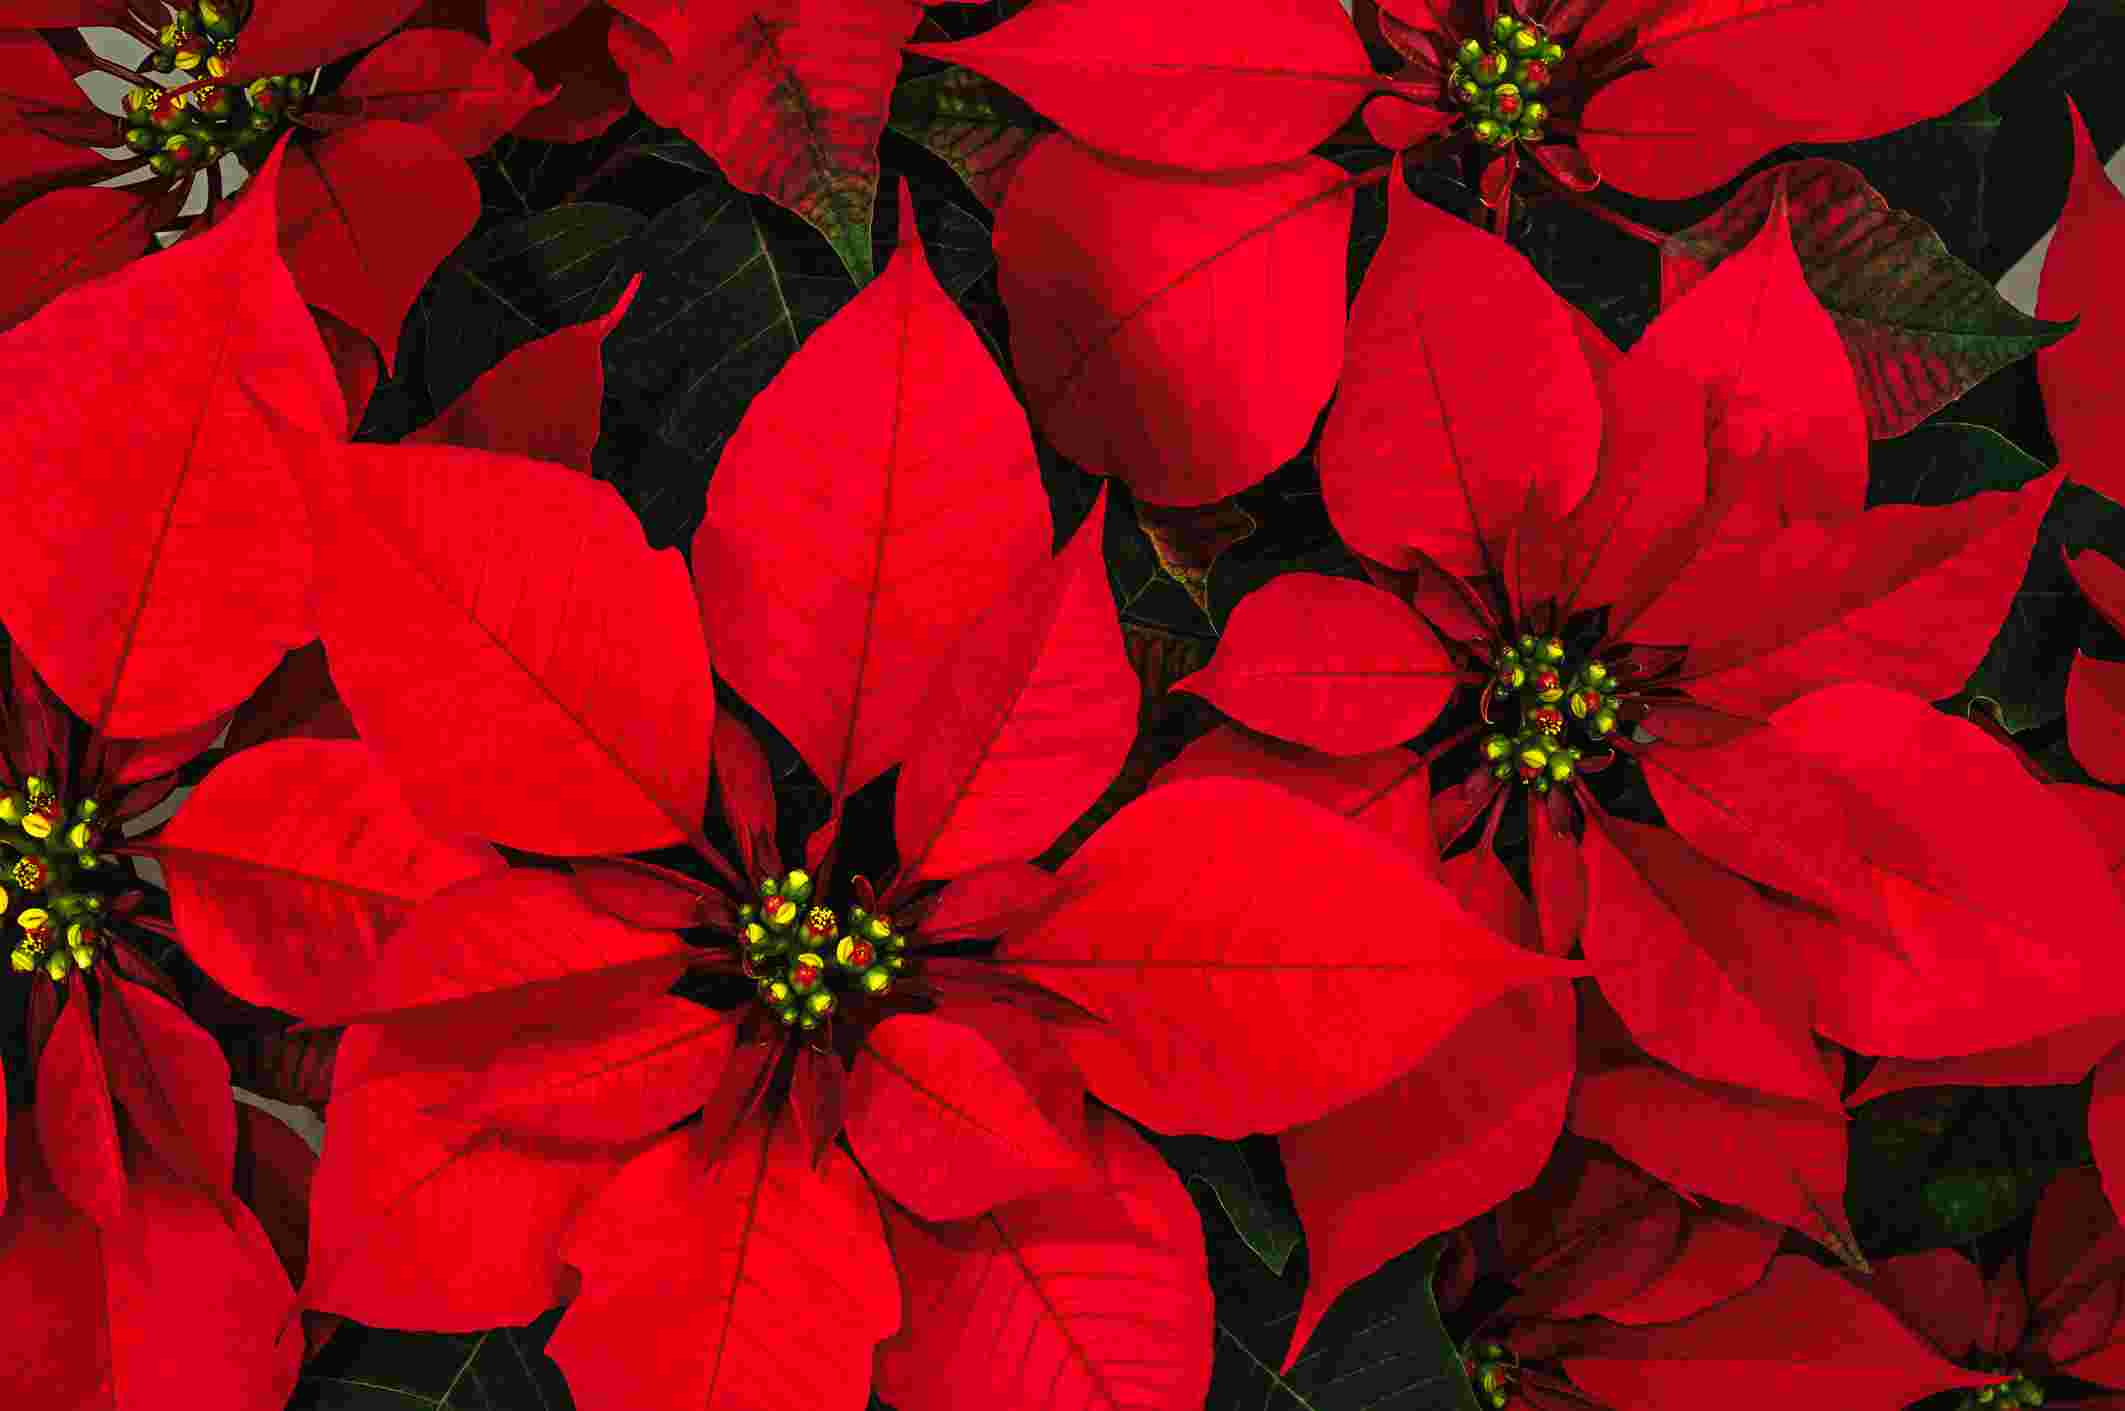 Red poinsettia resize